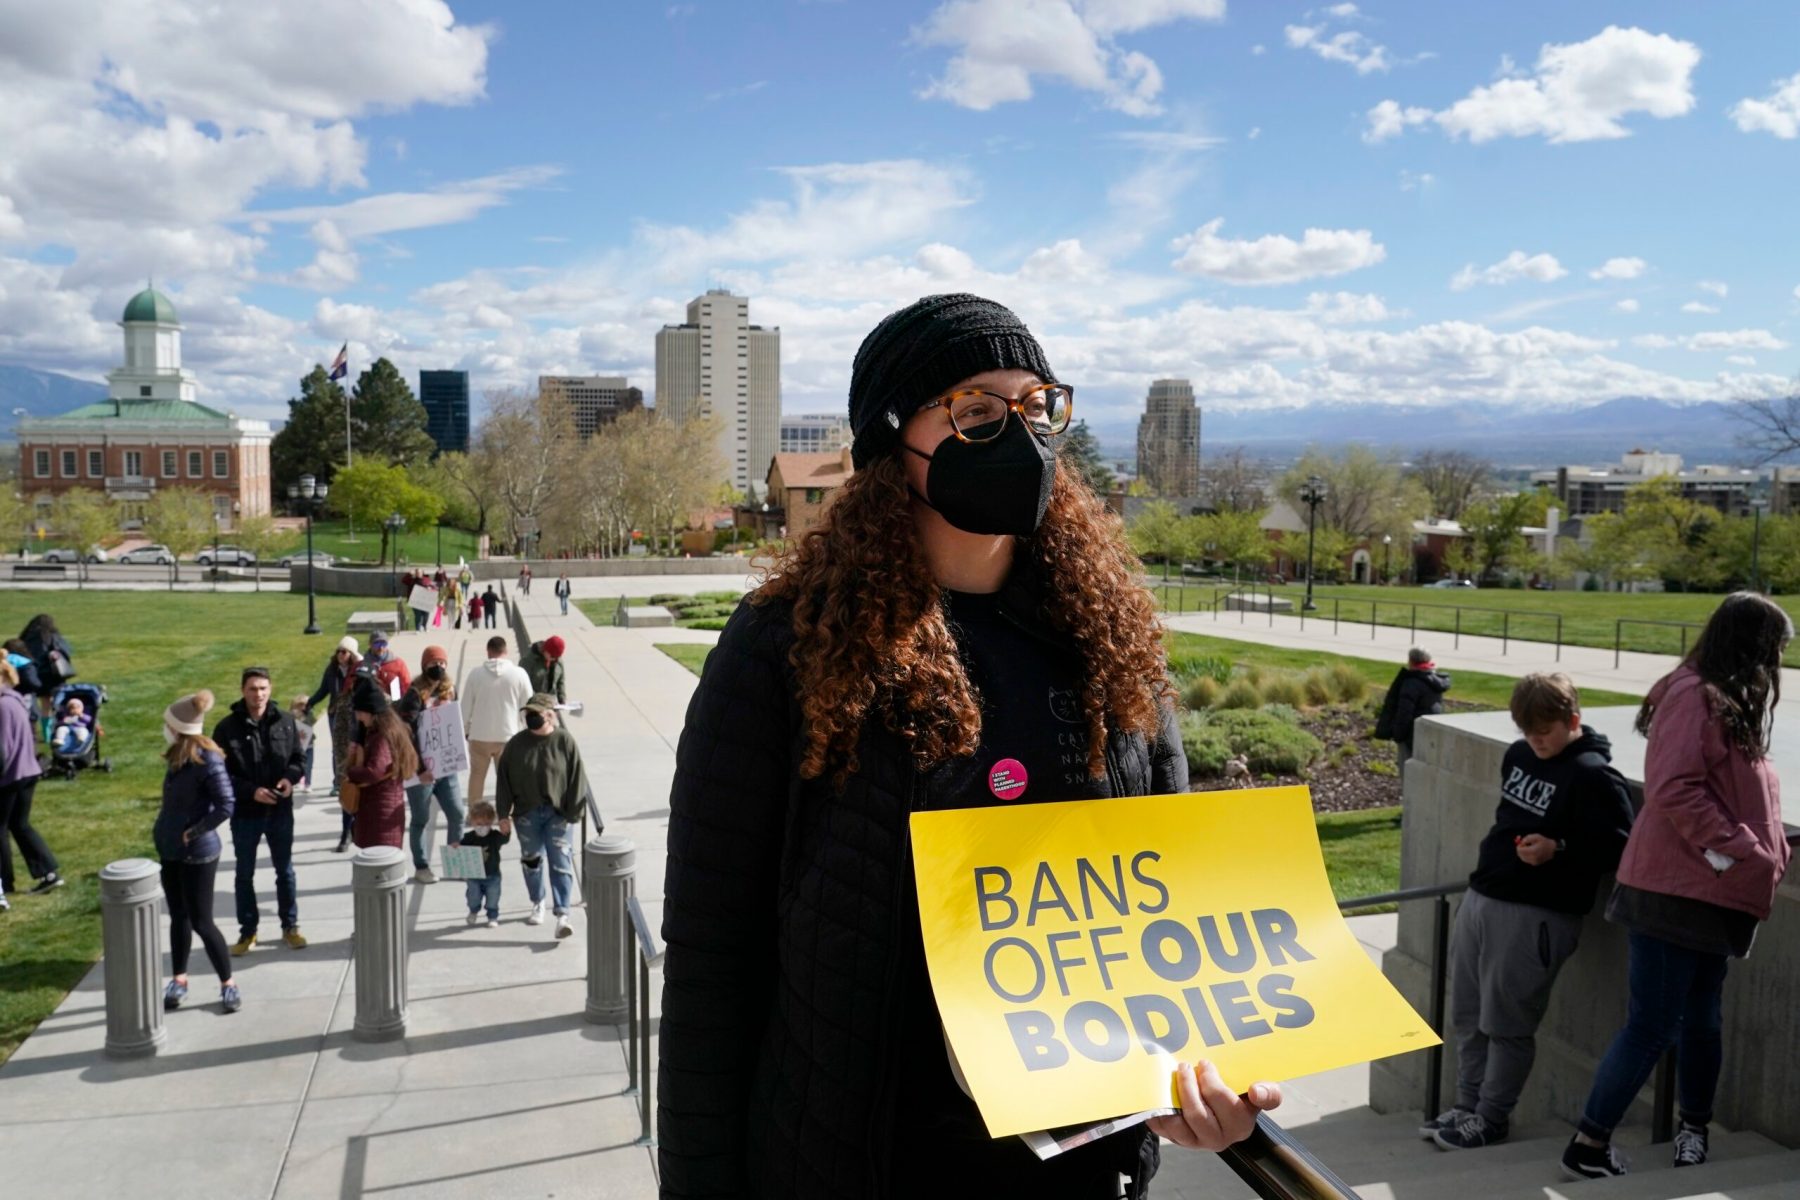 A person wearing a mask and a black beanie holds a yellow sign with the words "Bans off our bodies" on it.